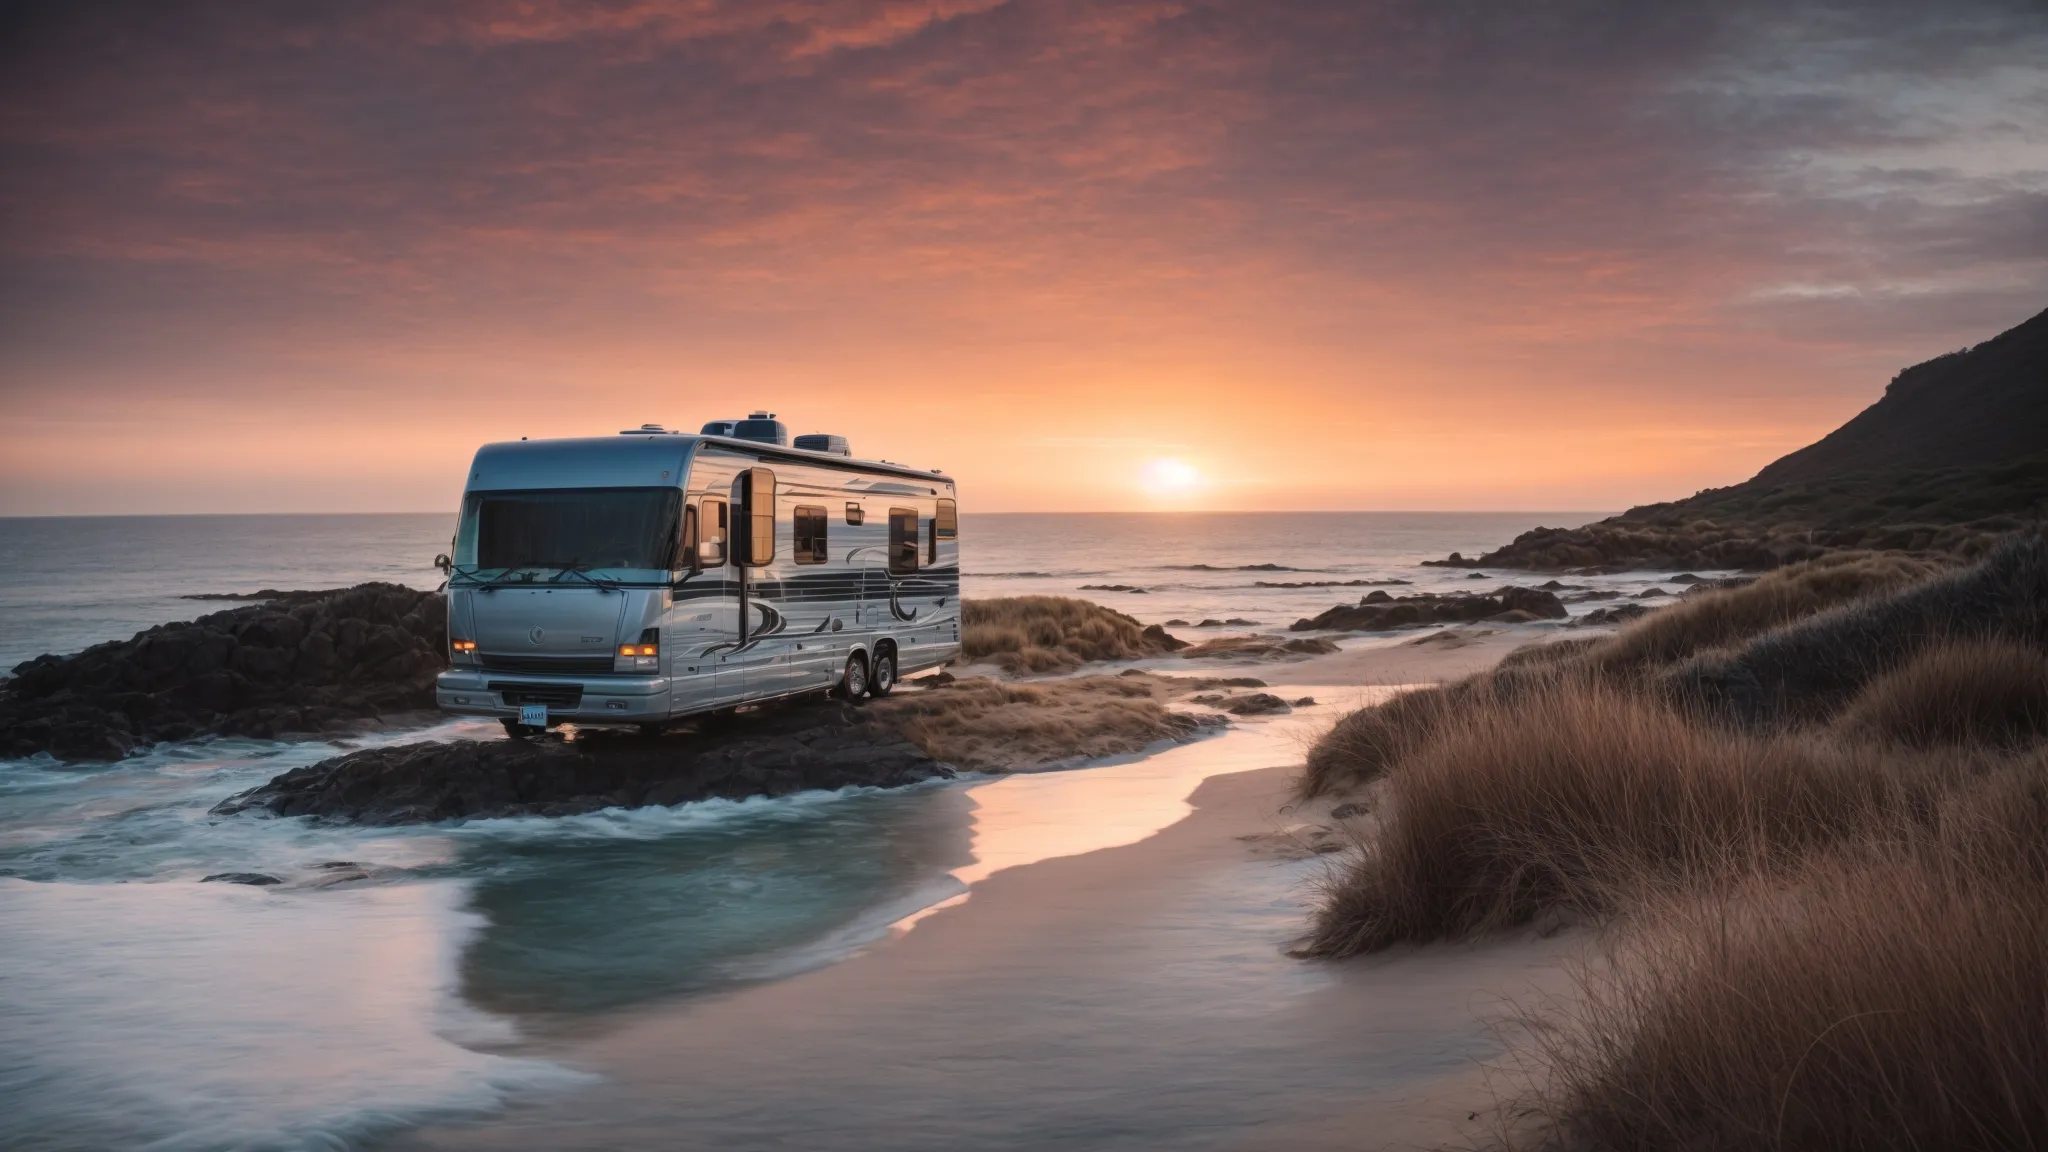 an rv parked amidst picturesque coastal scenery with a serene beach and a sunset backdrop.